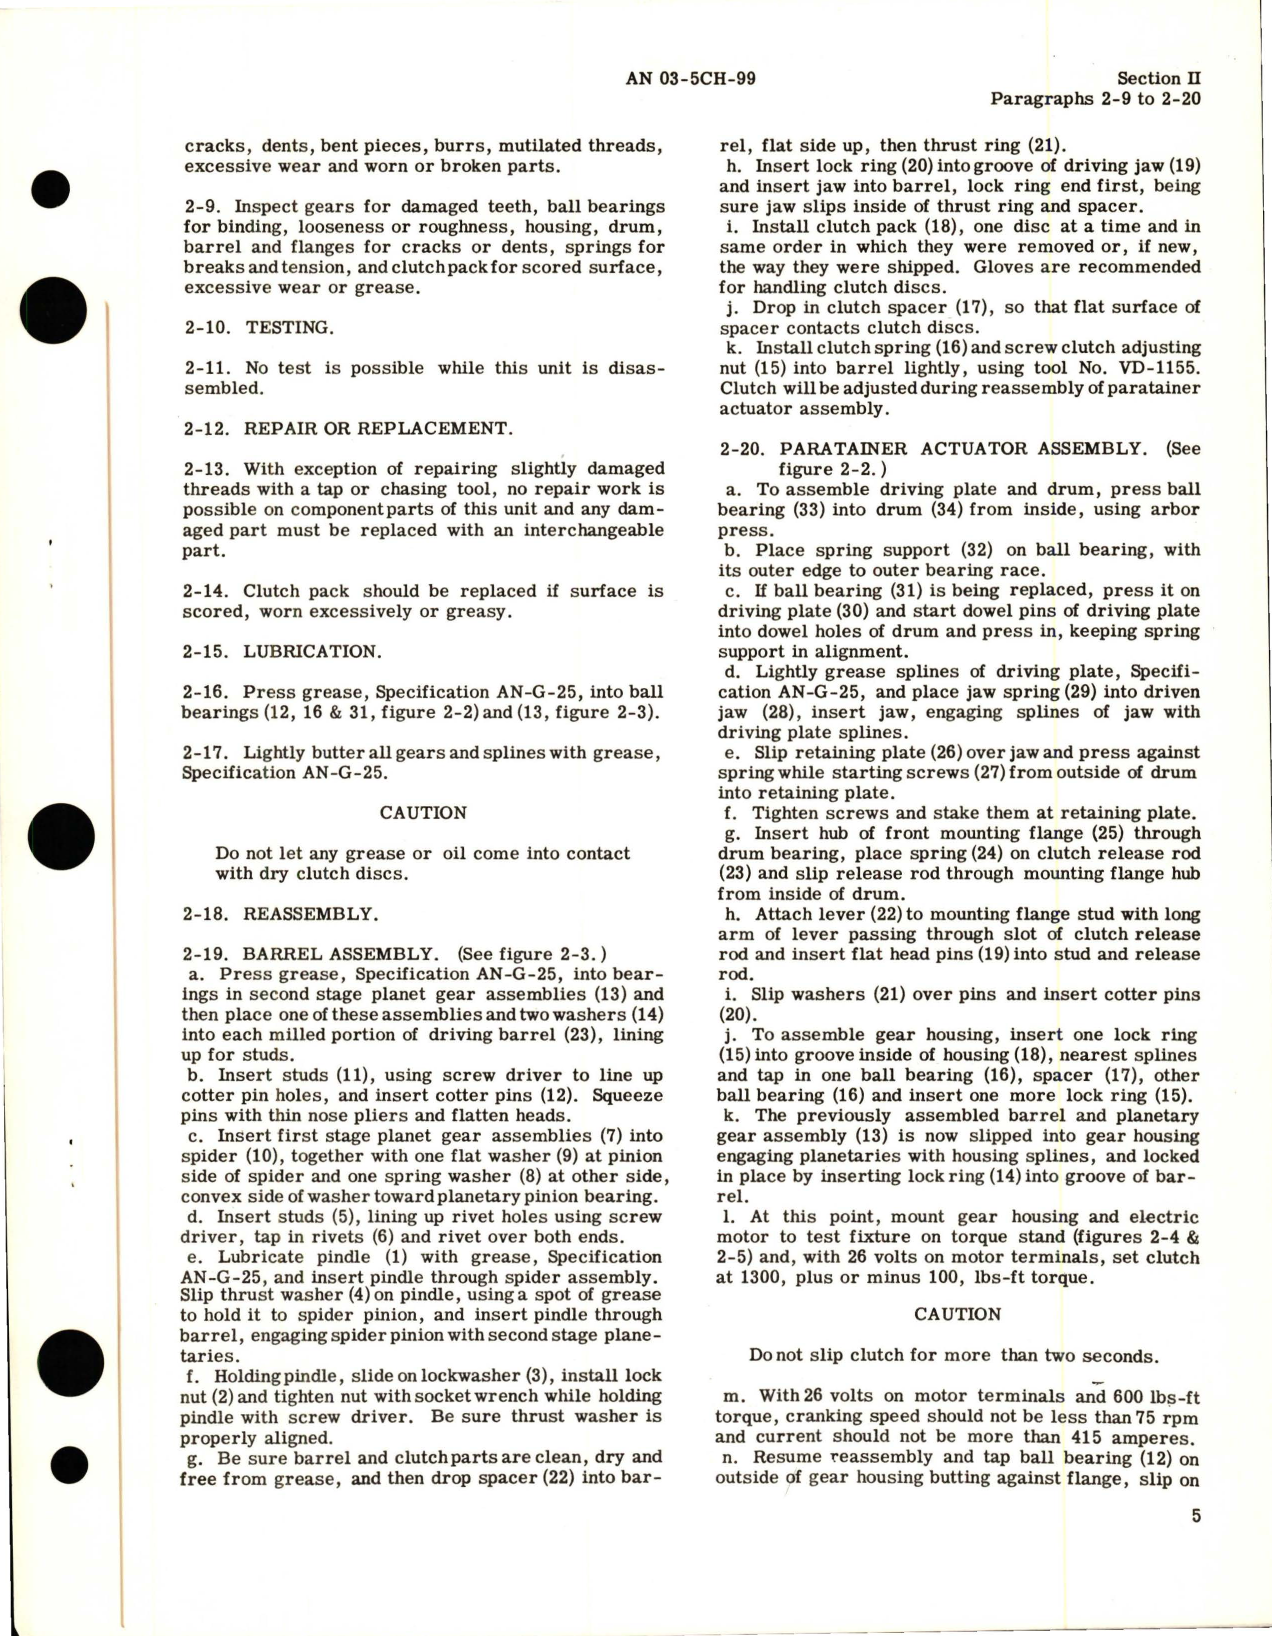 Sample page 7 from AirCorps Library document: Overhaul Instructions for Paratainer Actuator - Part VJ-810